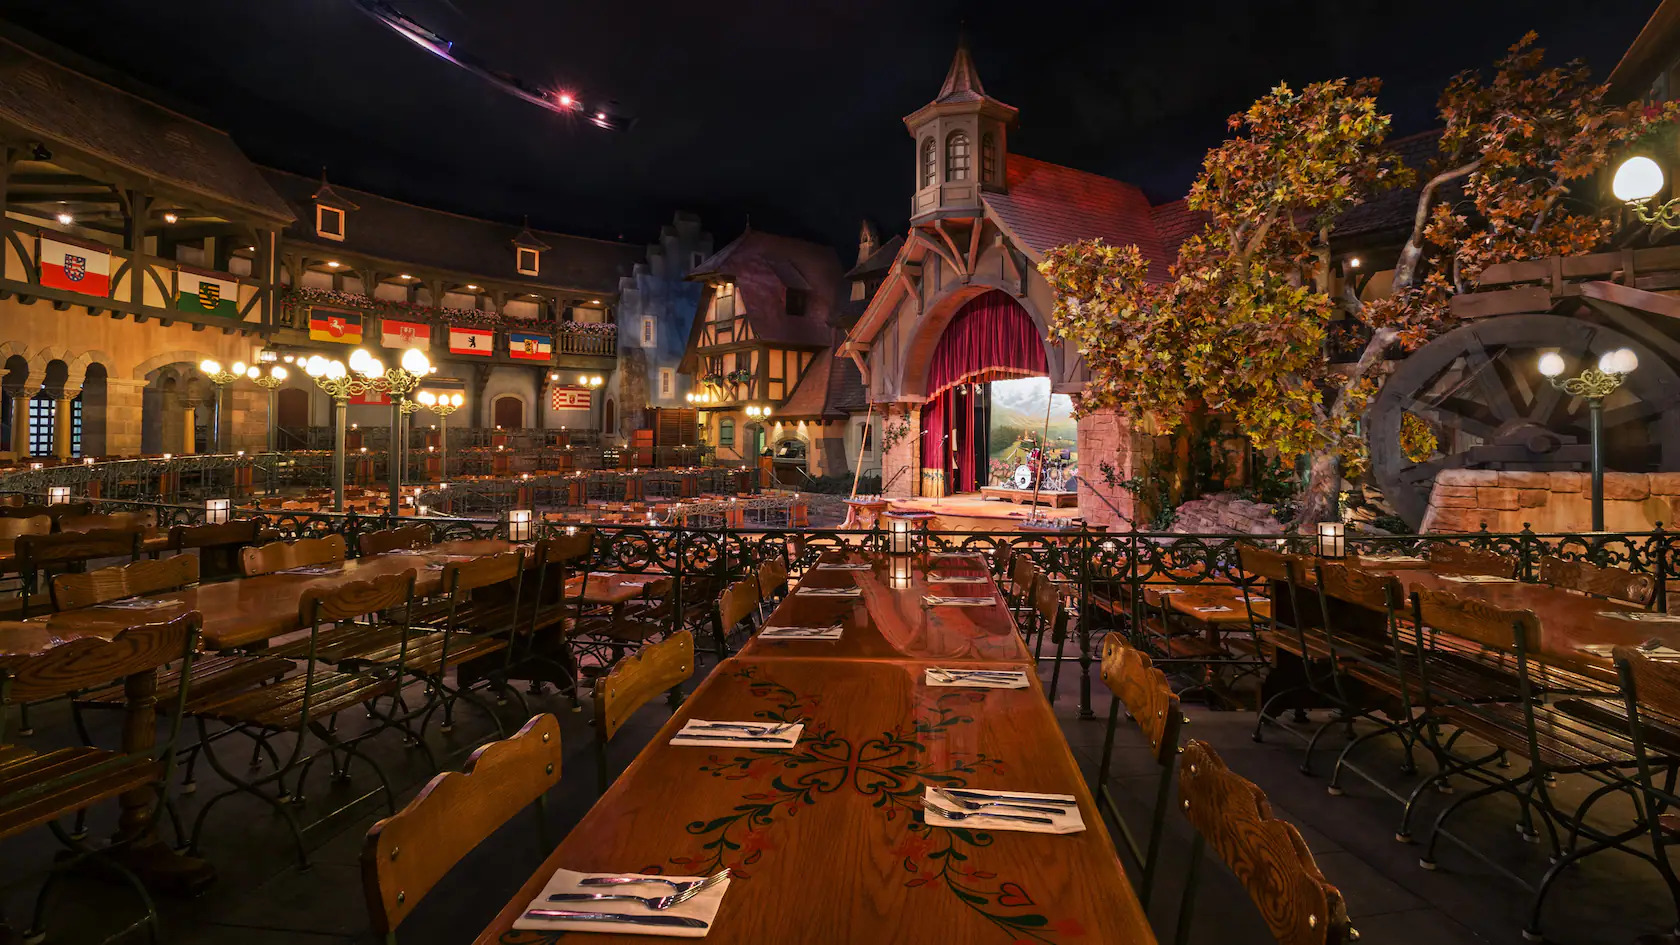 Inside the Biergarten Restaurant in the Germany Pavilion at EPCOT